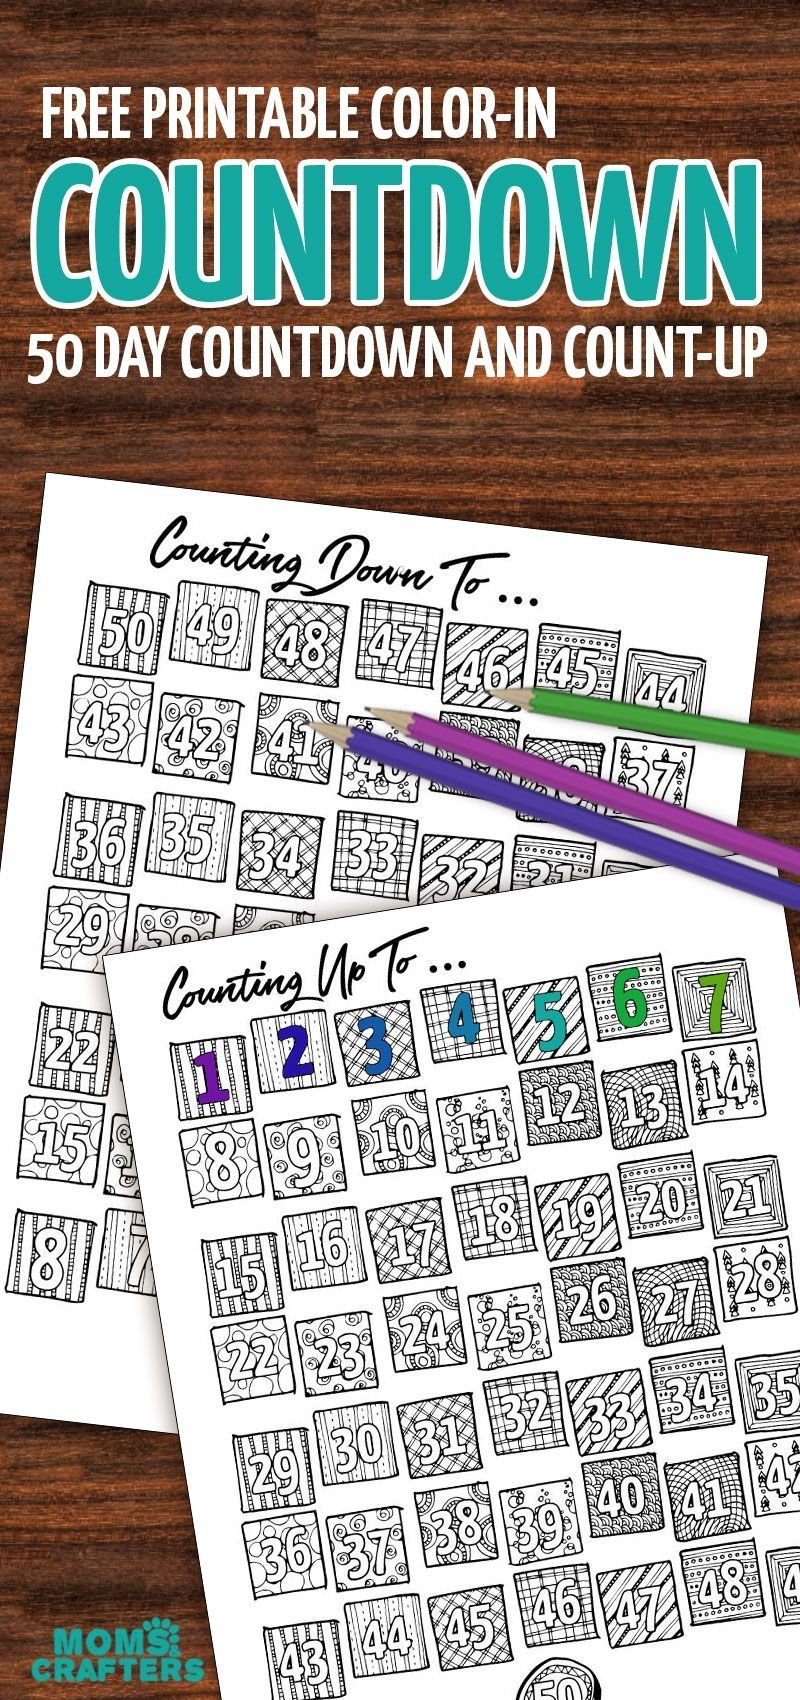 Grab This Fun Color-In Countdown And Progress Tracker (With